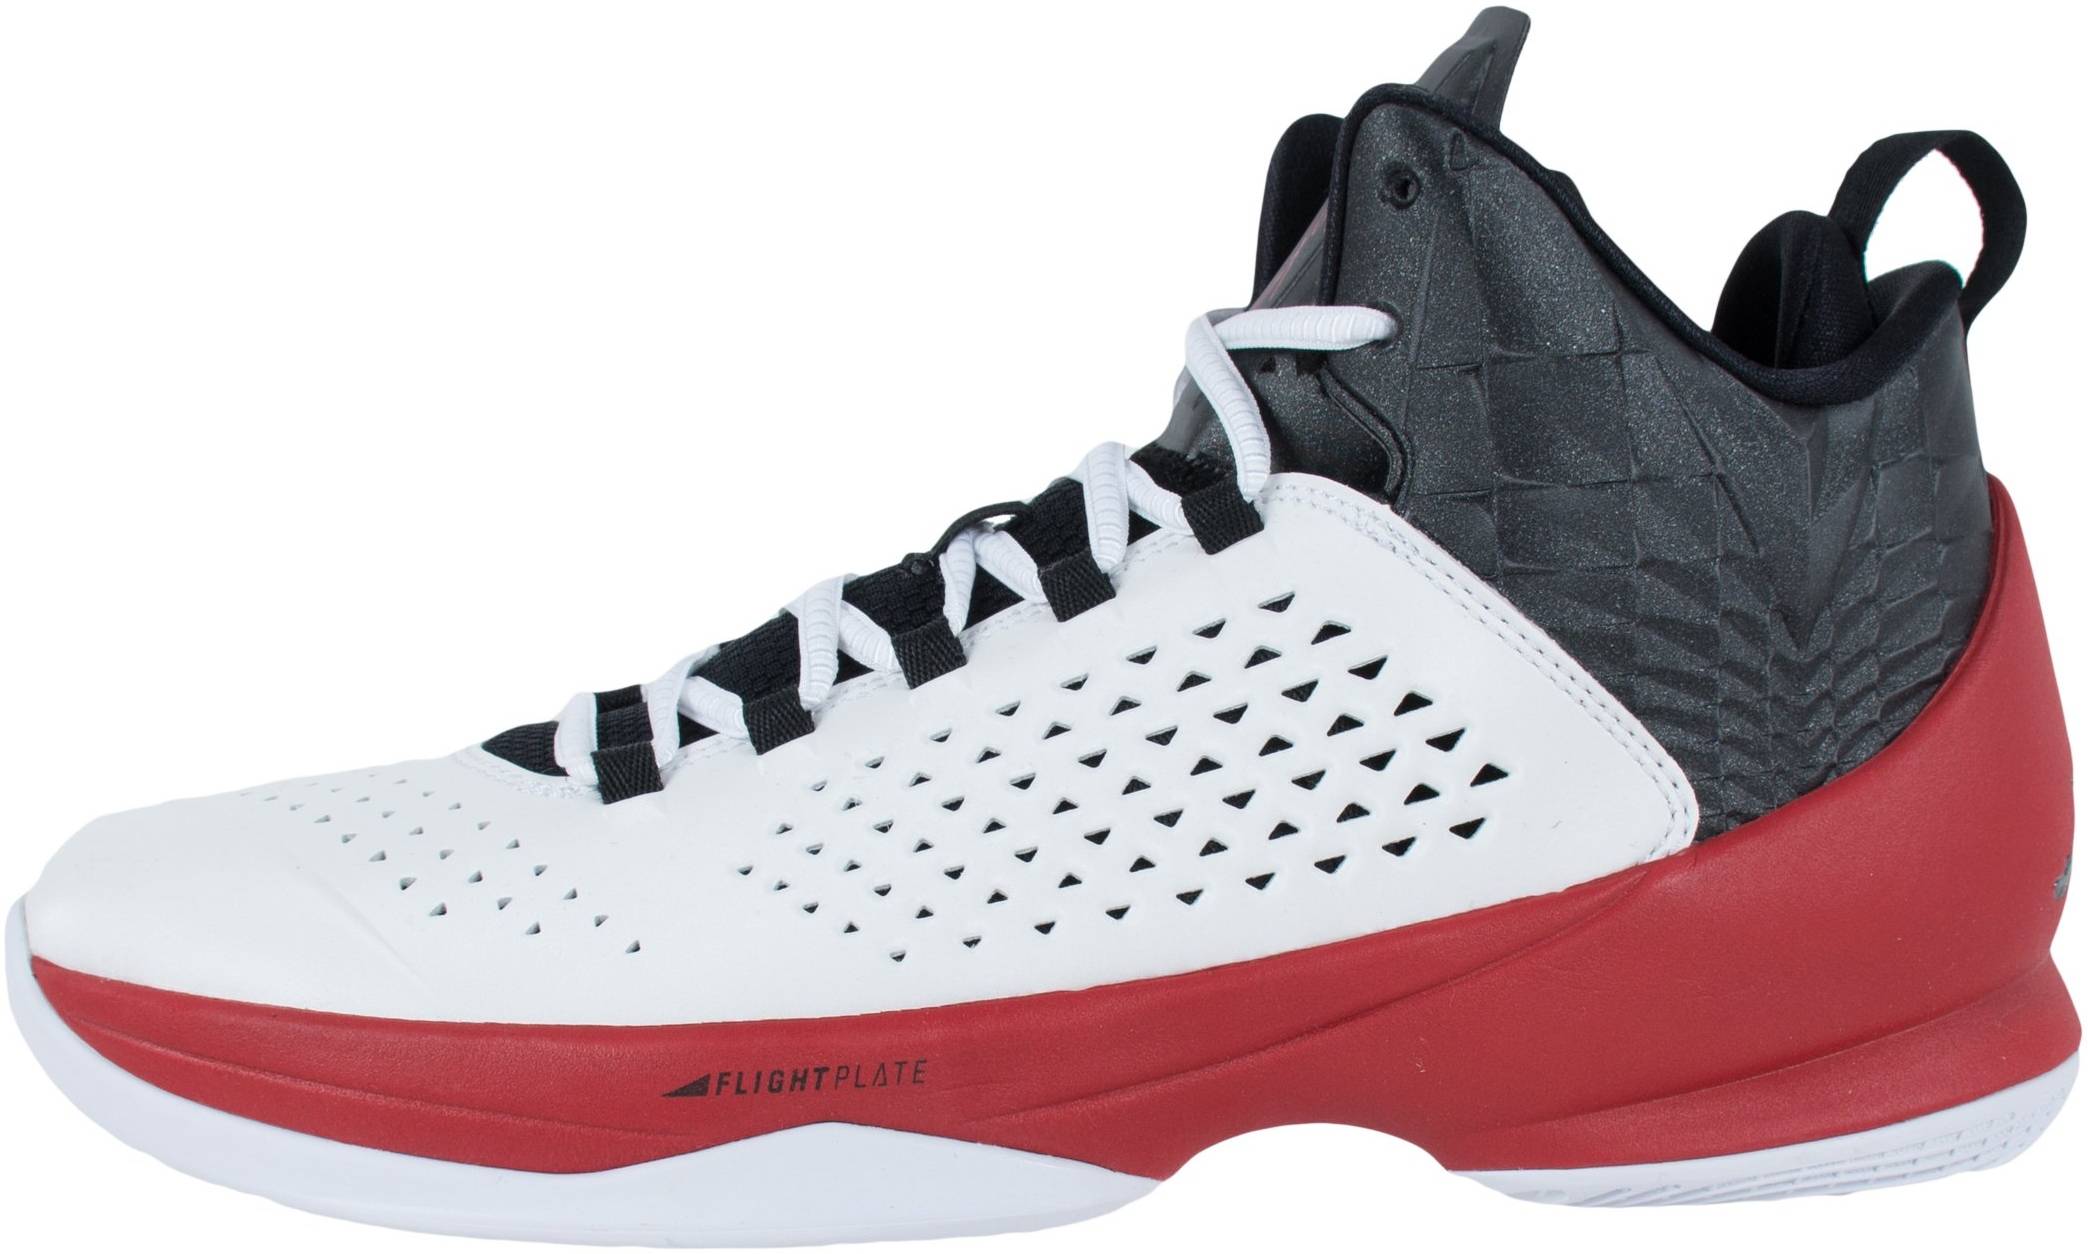 Only $137 + Review of Jordan Melo M11 